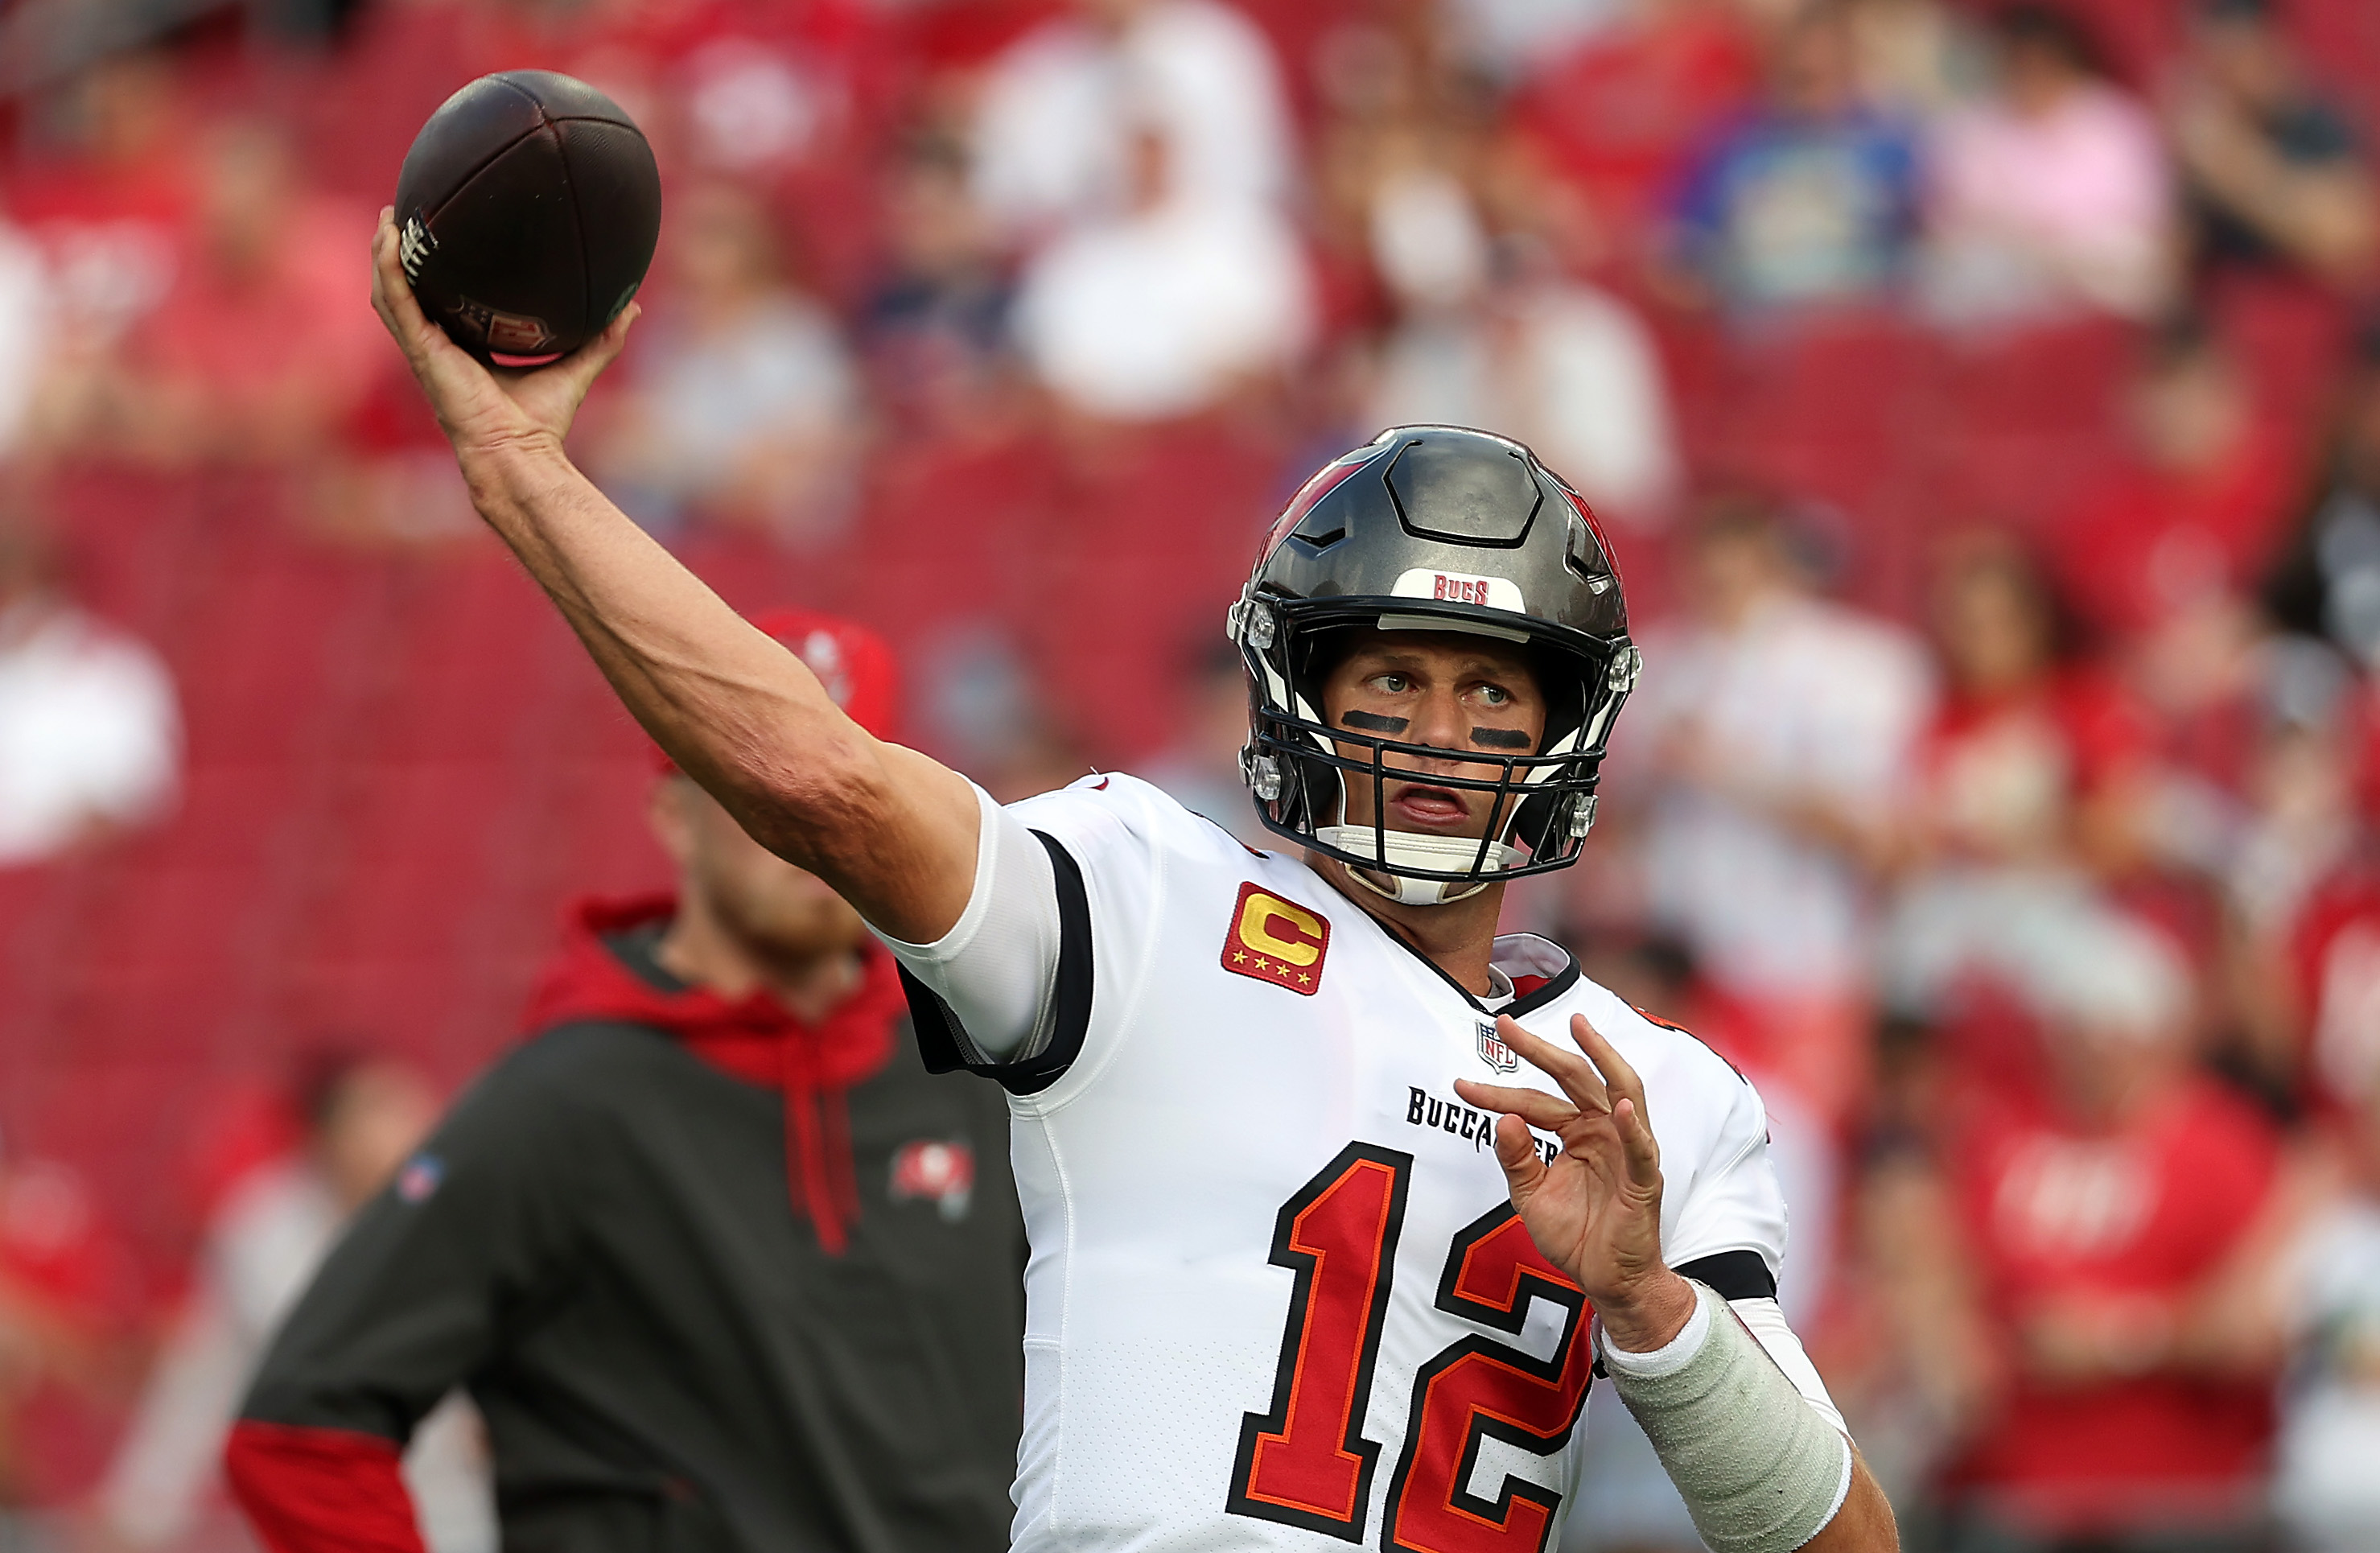 How to watch the Philadelphia Eagles vs. Tampa Bay Buccaneers